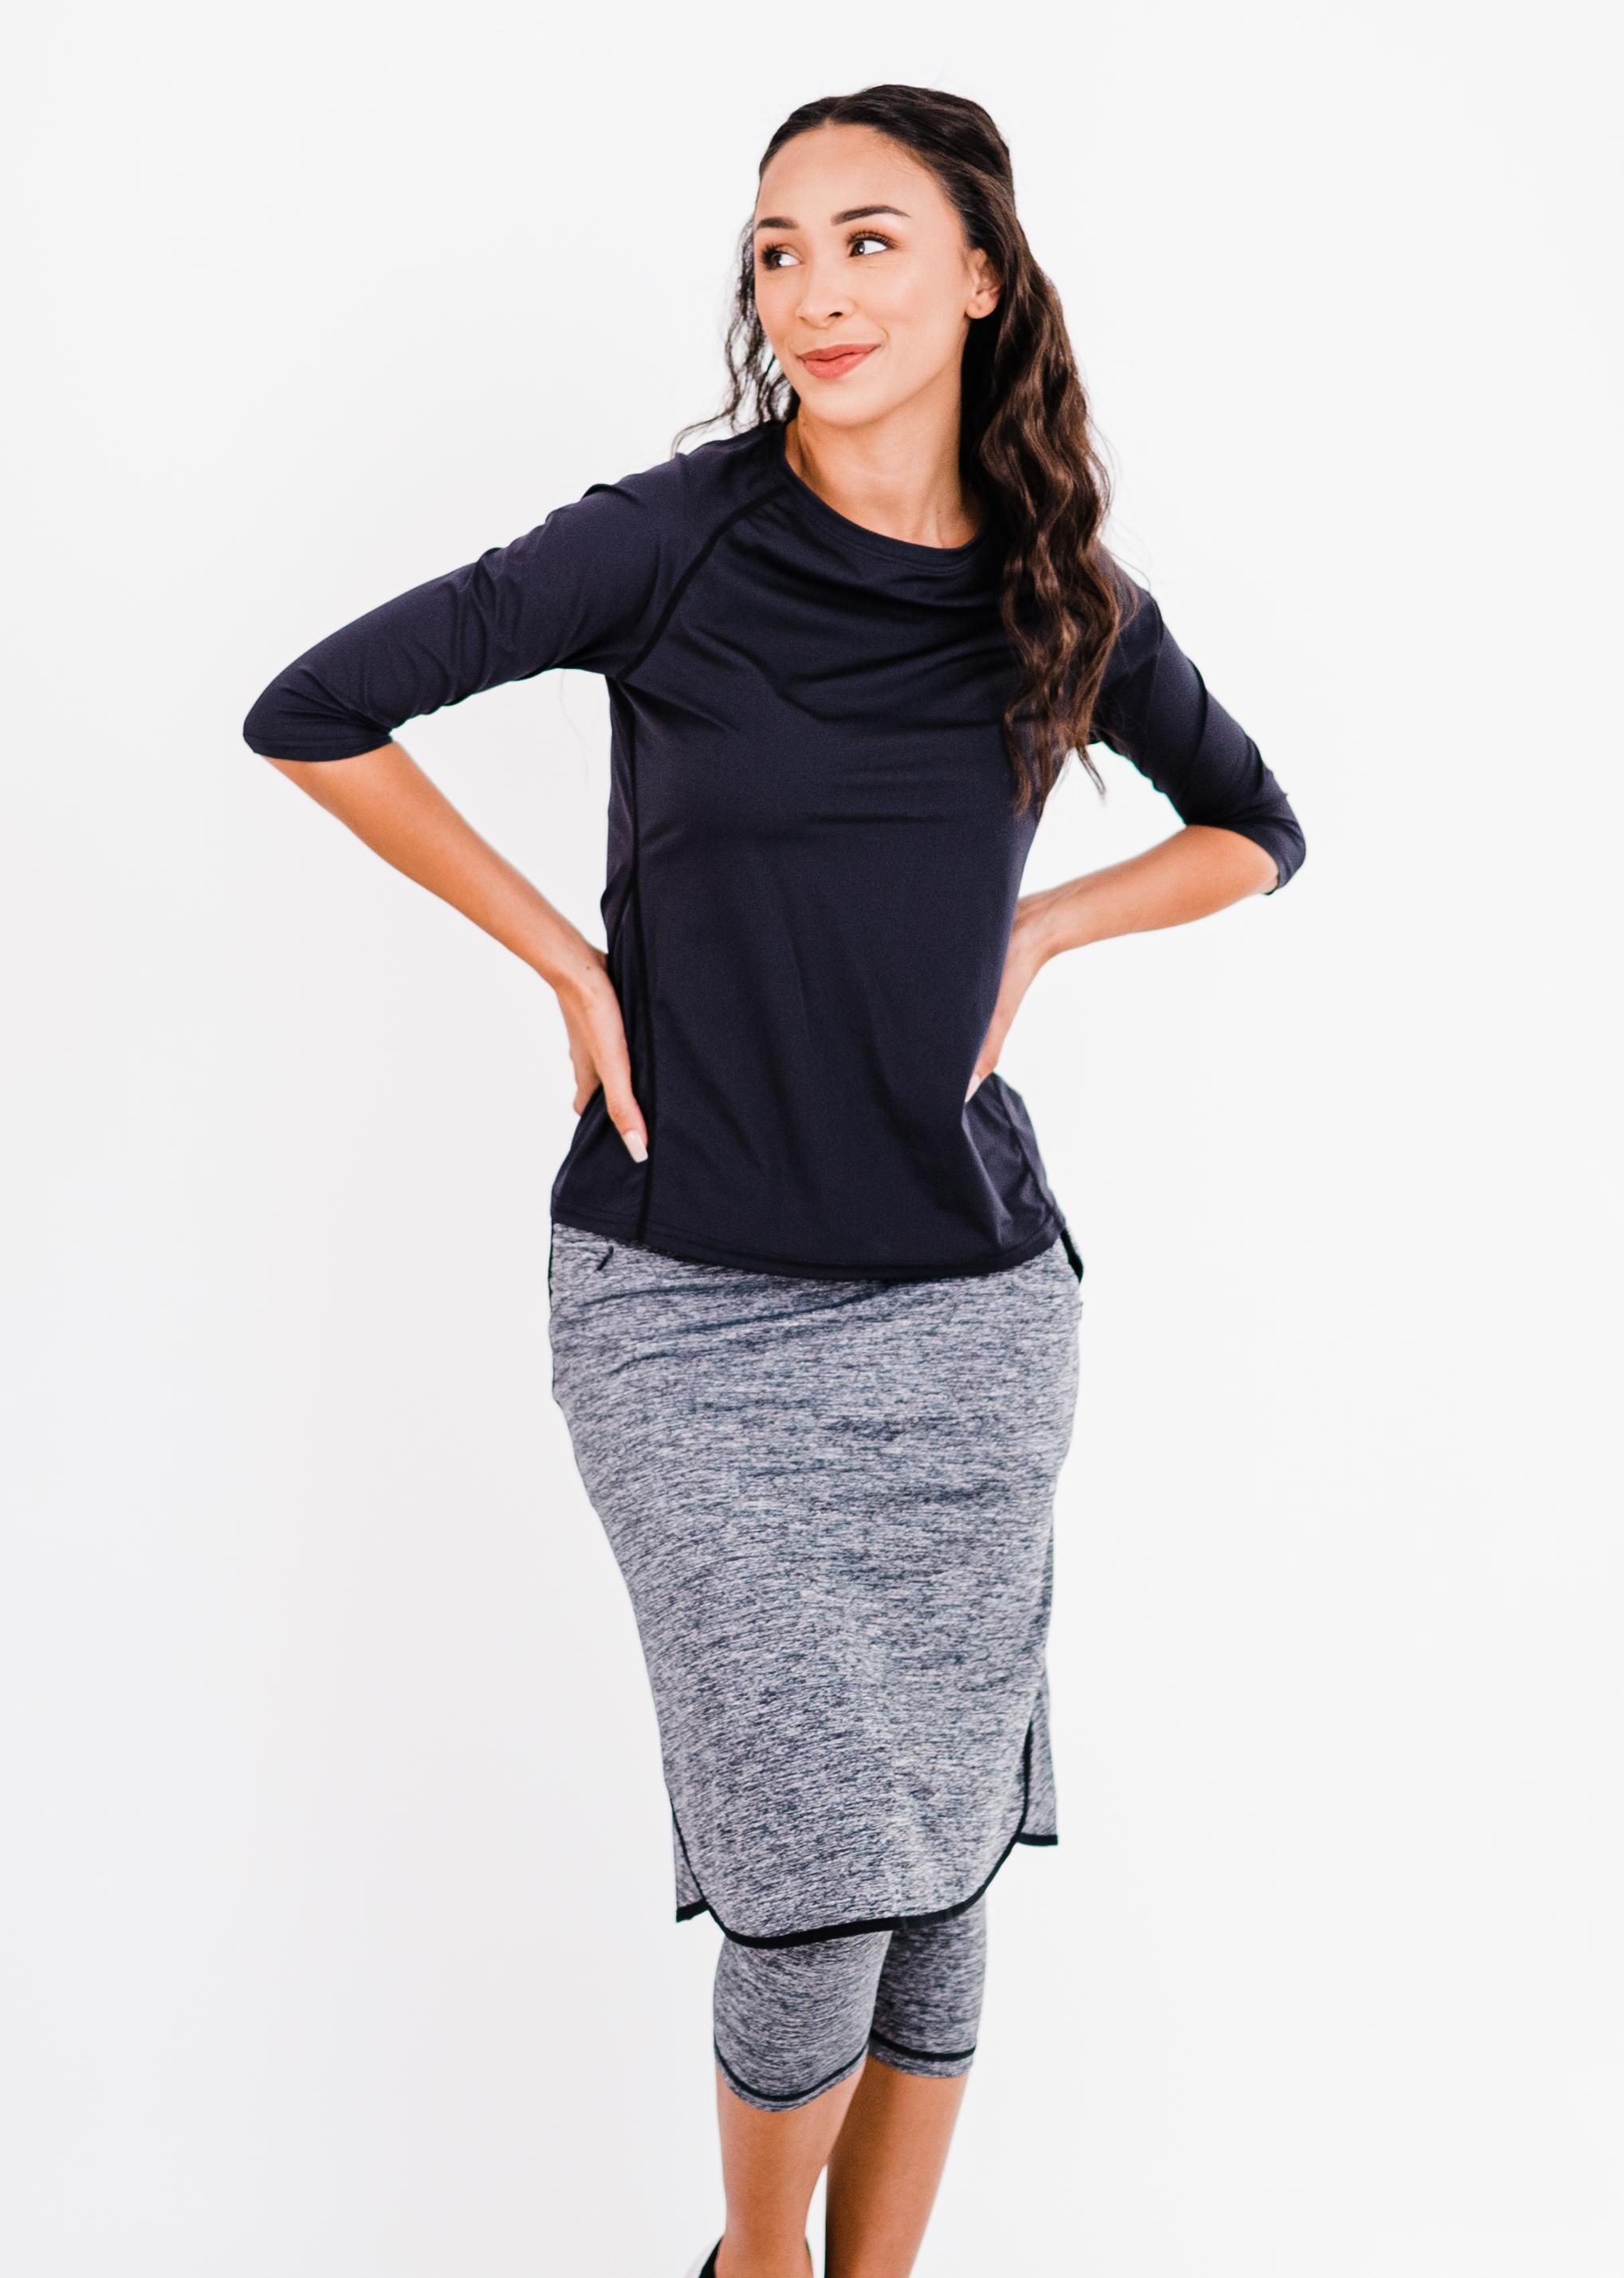 Sportswear Sets: Activewear Tops Paired with Skirts or Leggings